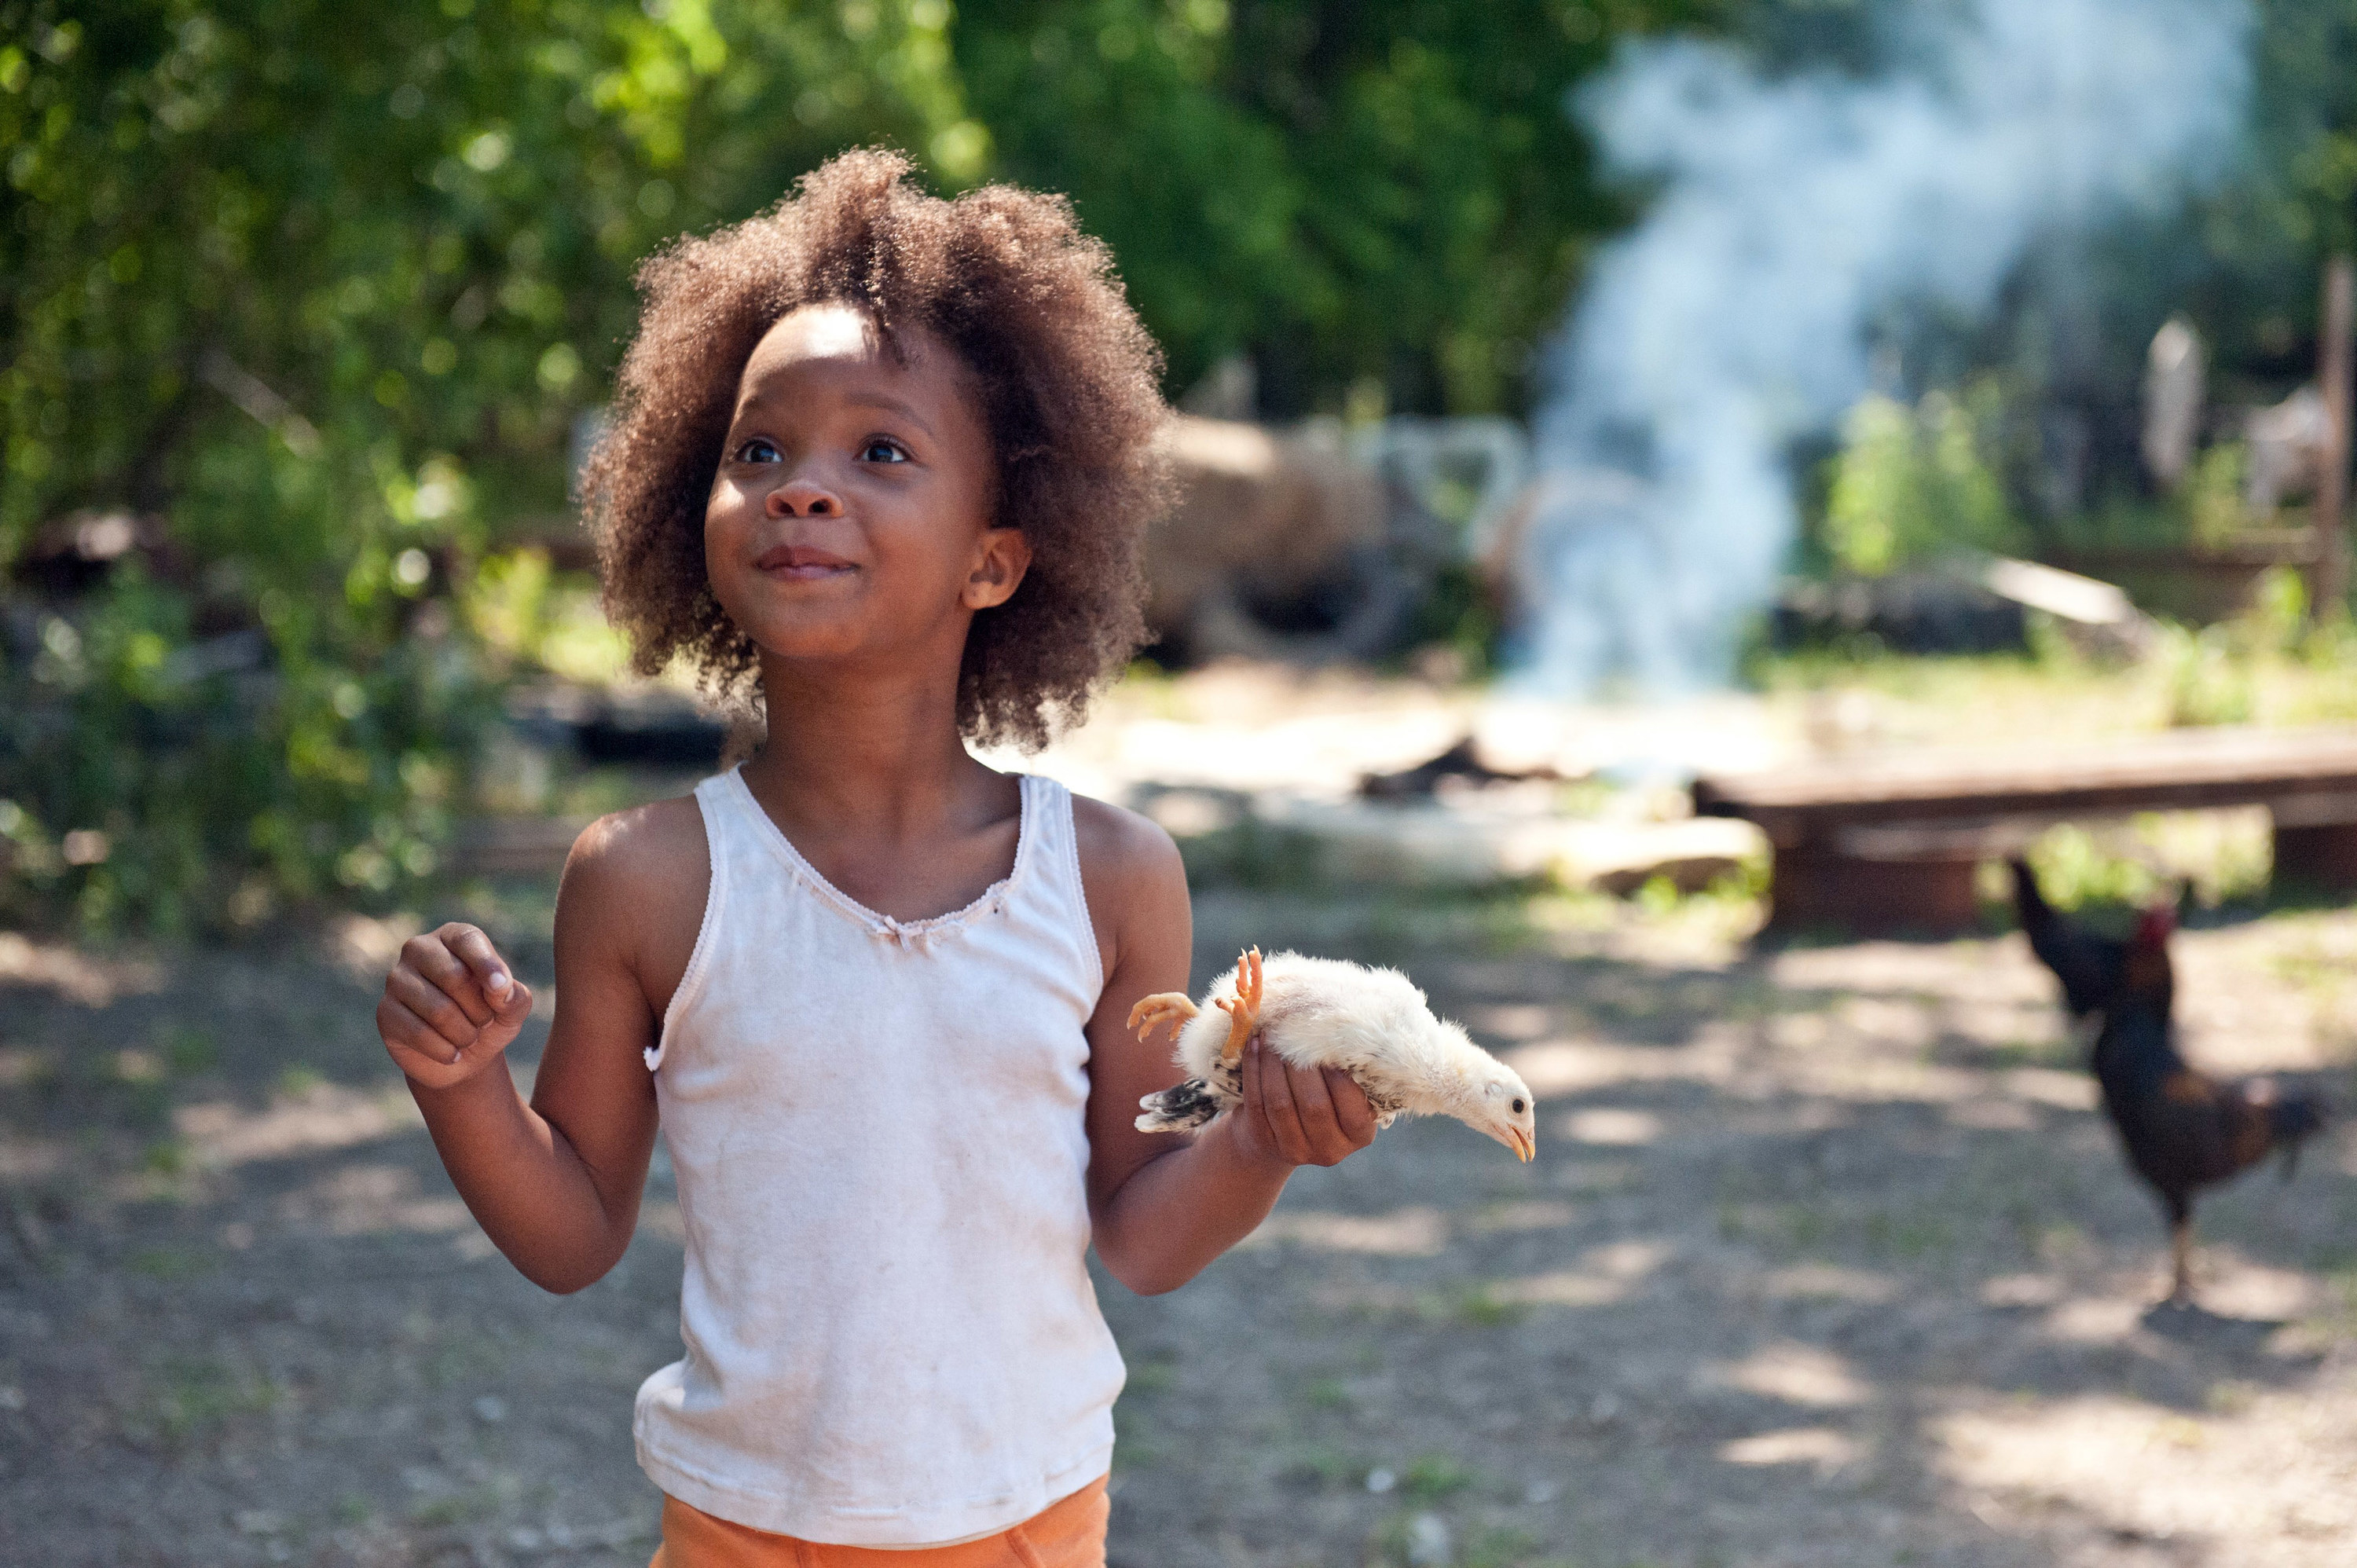 Quvenzhané Wallis stands with a bird in her hand